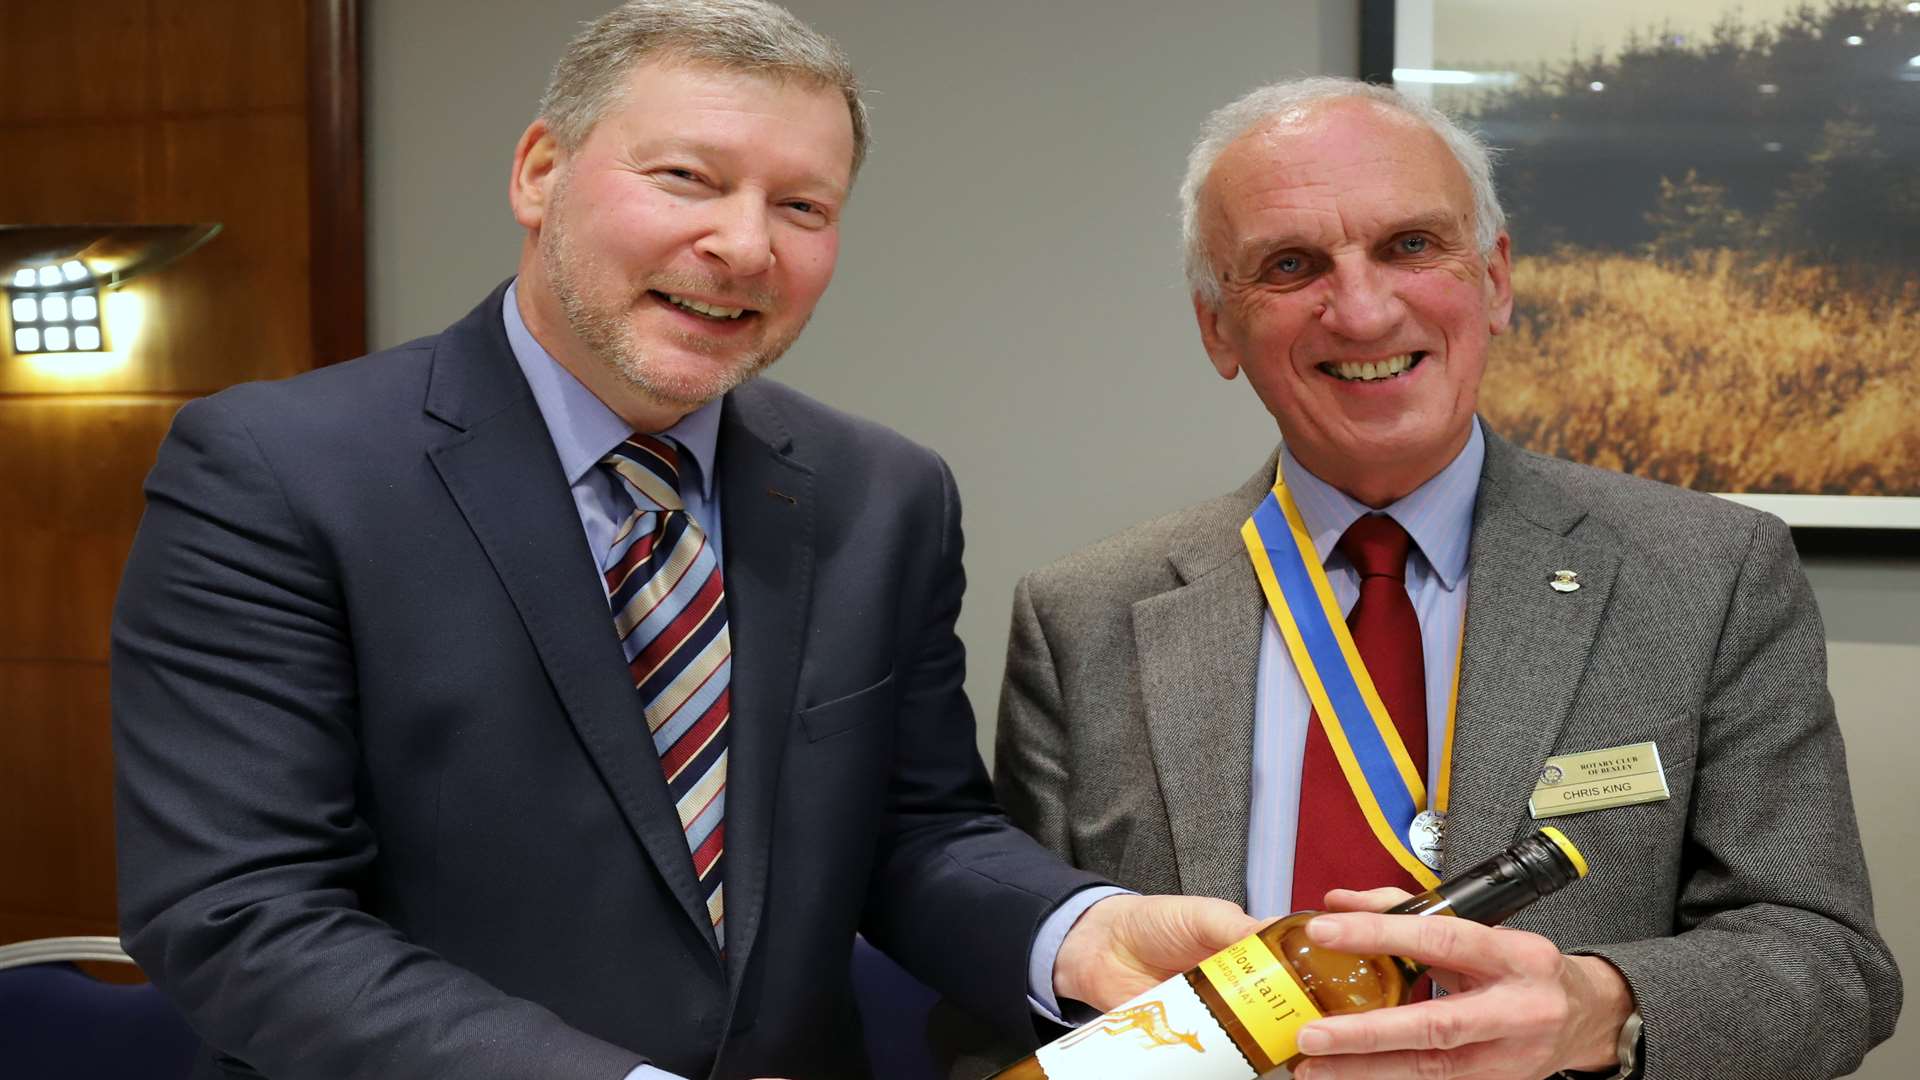 Chris King, President of Bexley Rotary Club, presents a bottle of wine to Simon Dolby of the KM Charity Team.